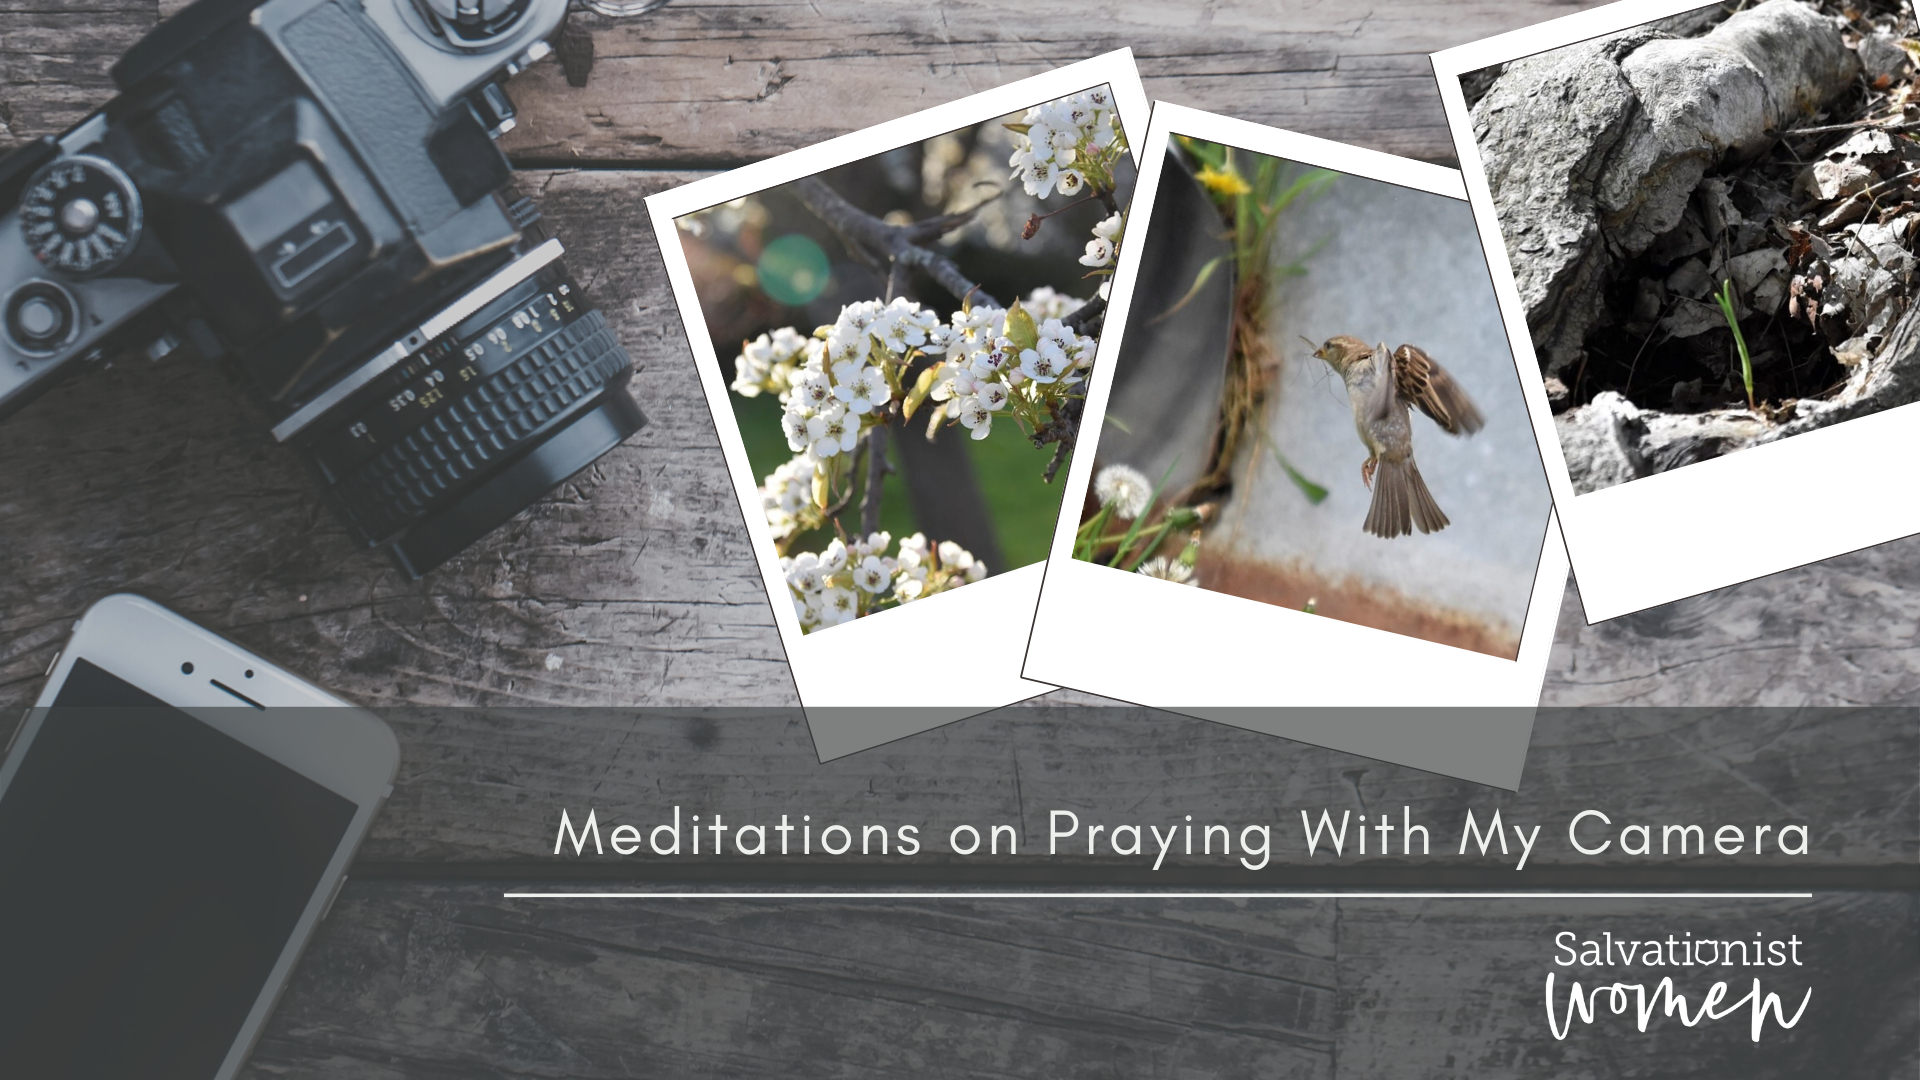 Barb's Story: Praying with my Camera